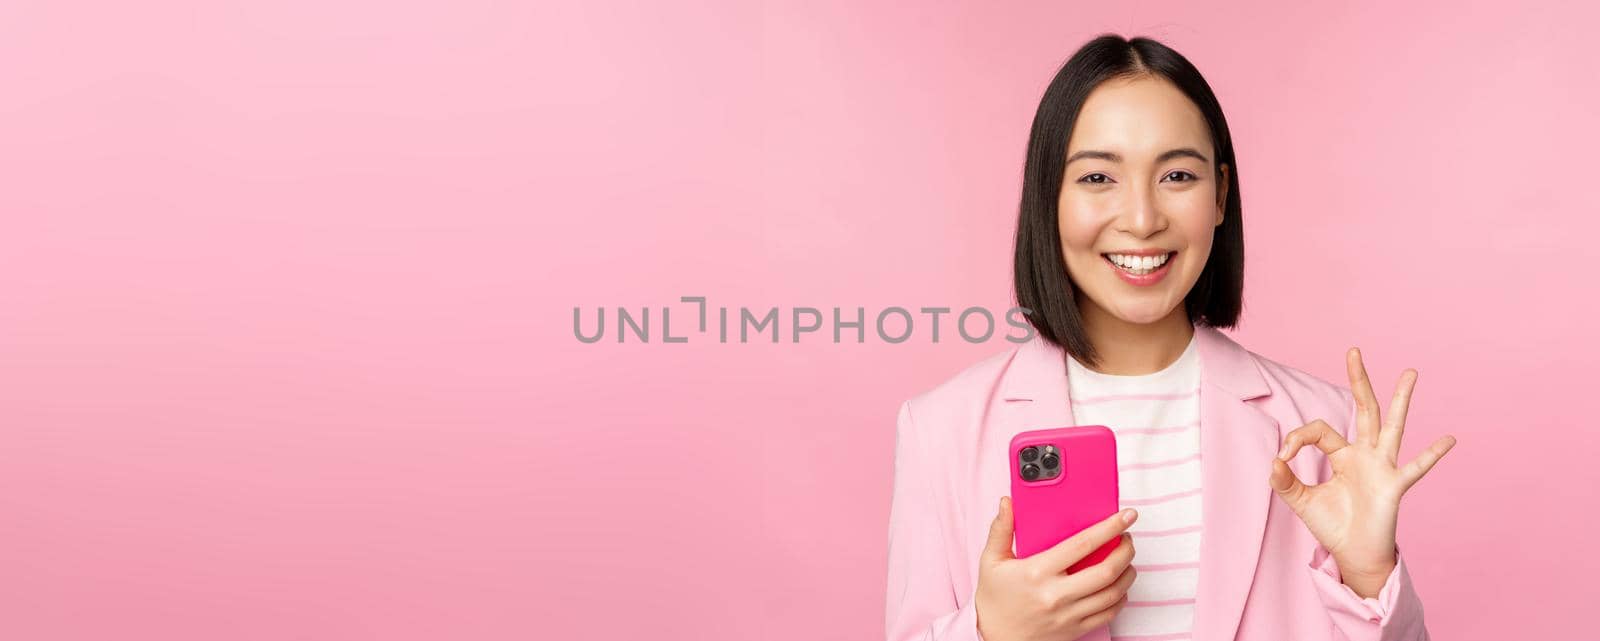 Smiling asian businesswoman showing okay sign while using mobile phone application, recommending smartphone app, standing over pink background.